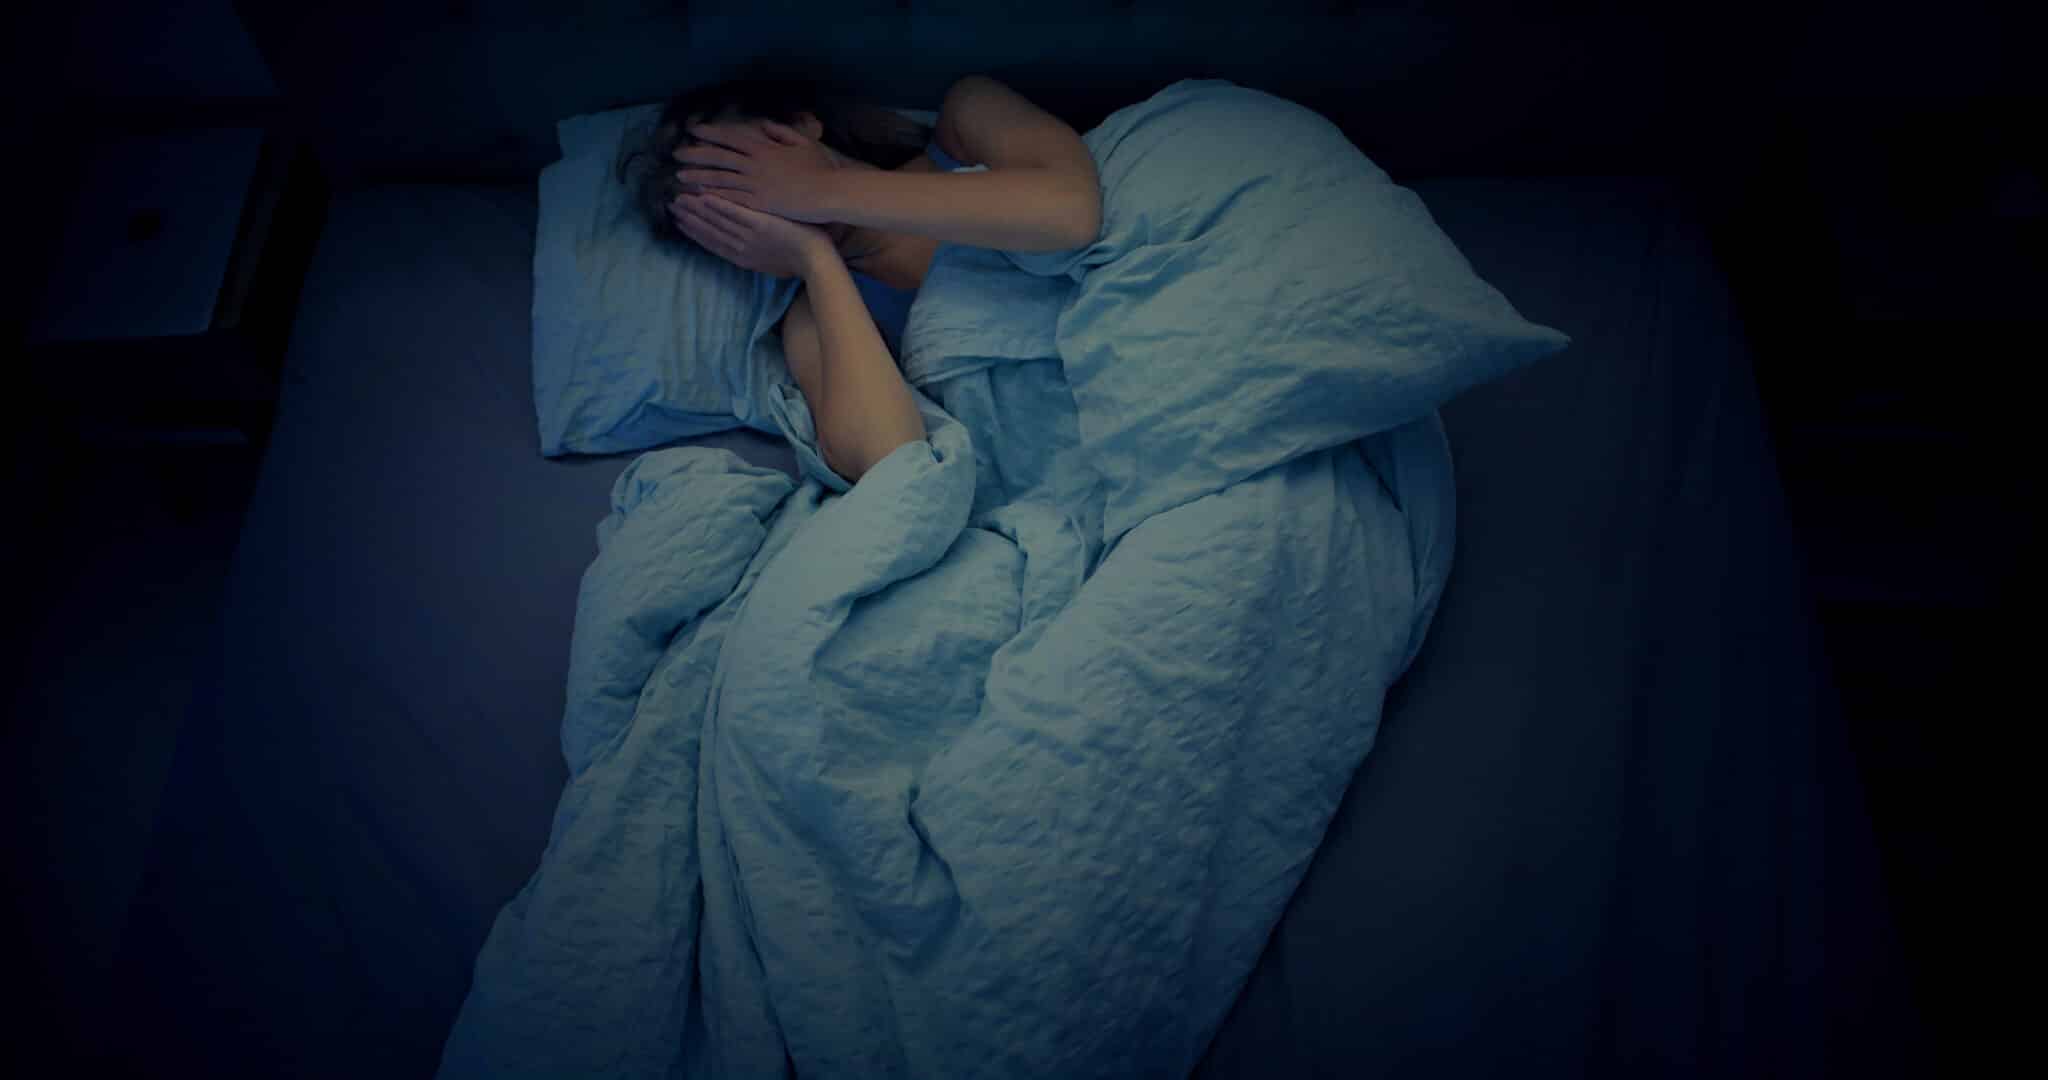 When is Insomnia Serious?